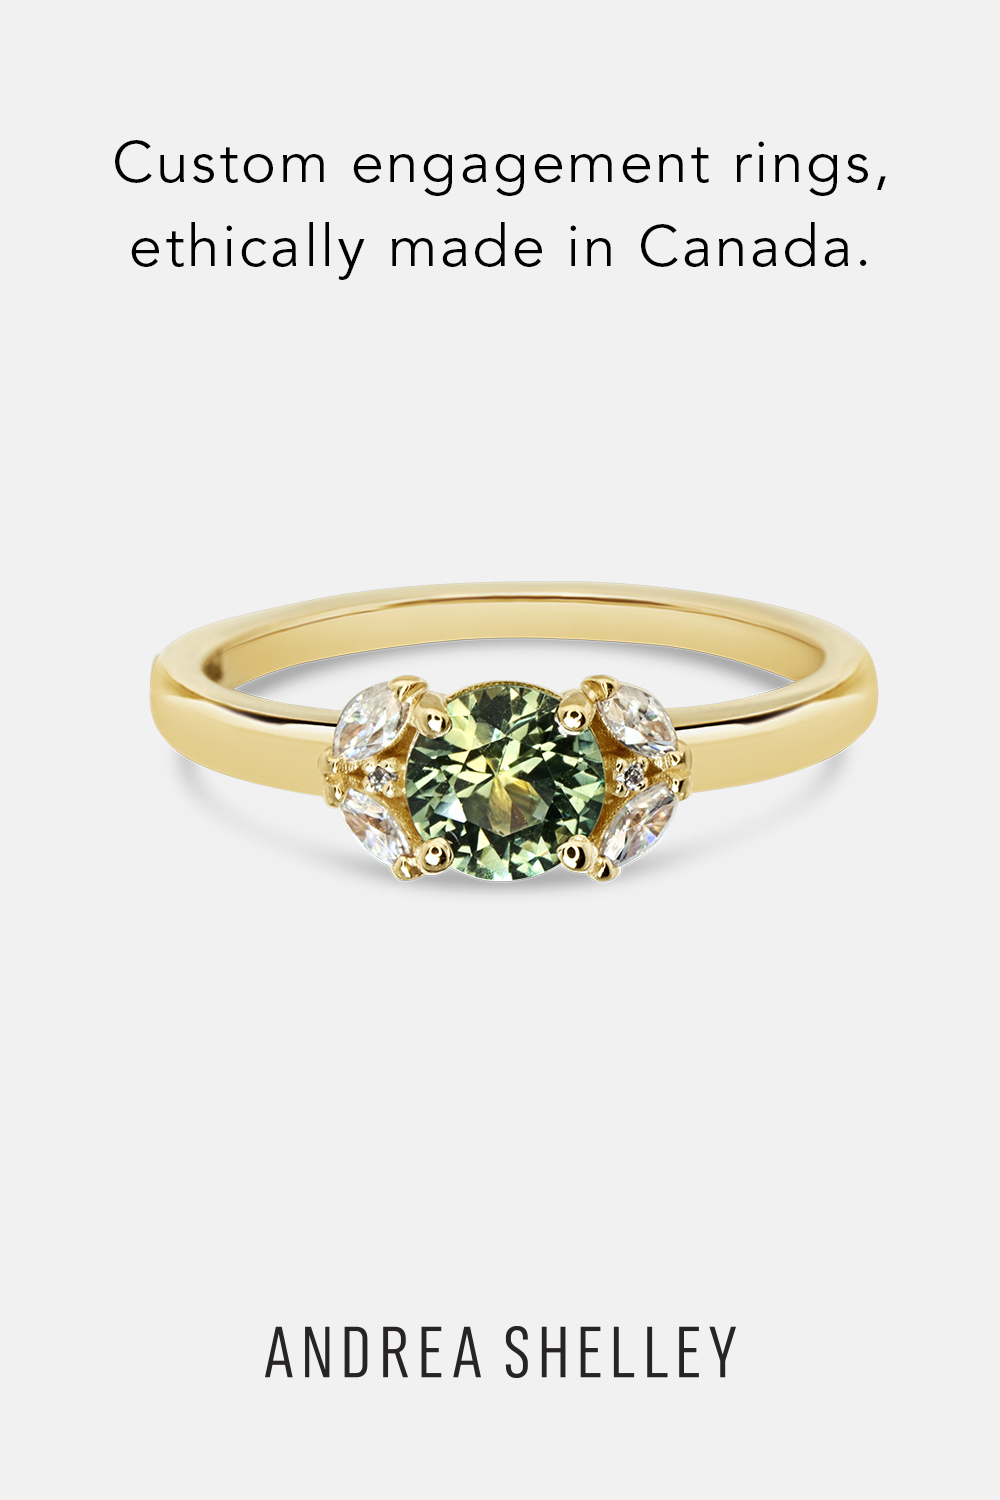 Custom engagement rings ethically made in Canada